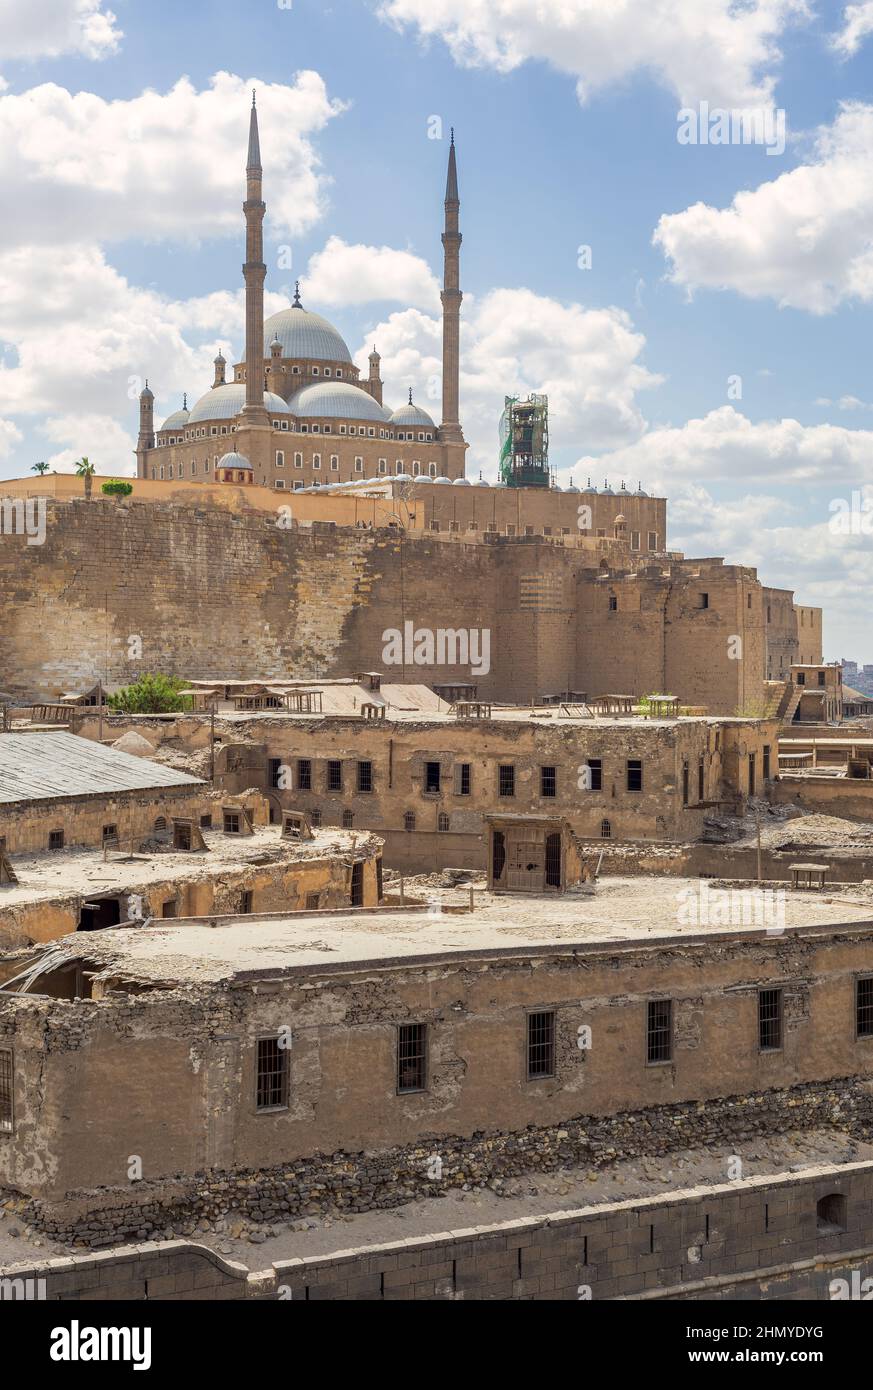 The great Mosque of Muhammad Ali Pasha, aka Alabaster Mosque, situated in the Citadel of Cairo in Egypt, one of the landmarks and tourist attractions of Cairo, Egypt Stock Photo